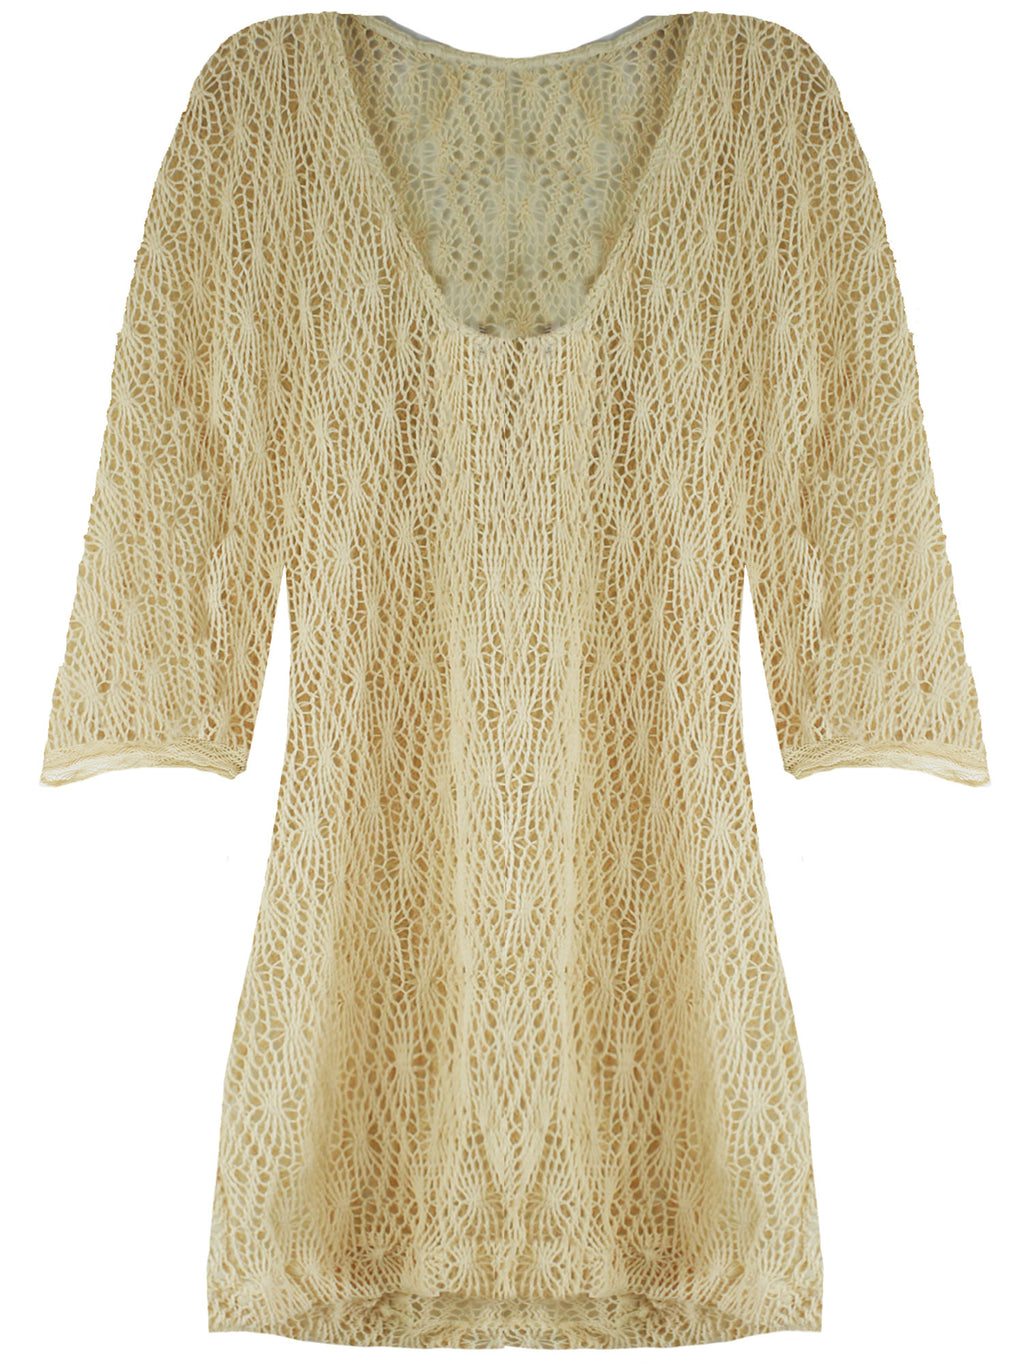 Ivory Mesh Lightweight See Through Tunic Beach Cover-Up With Sash